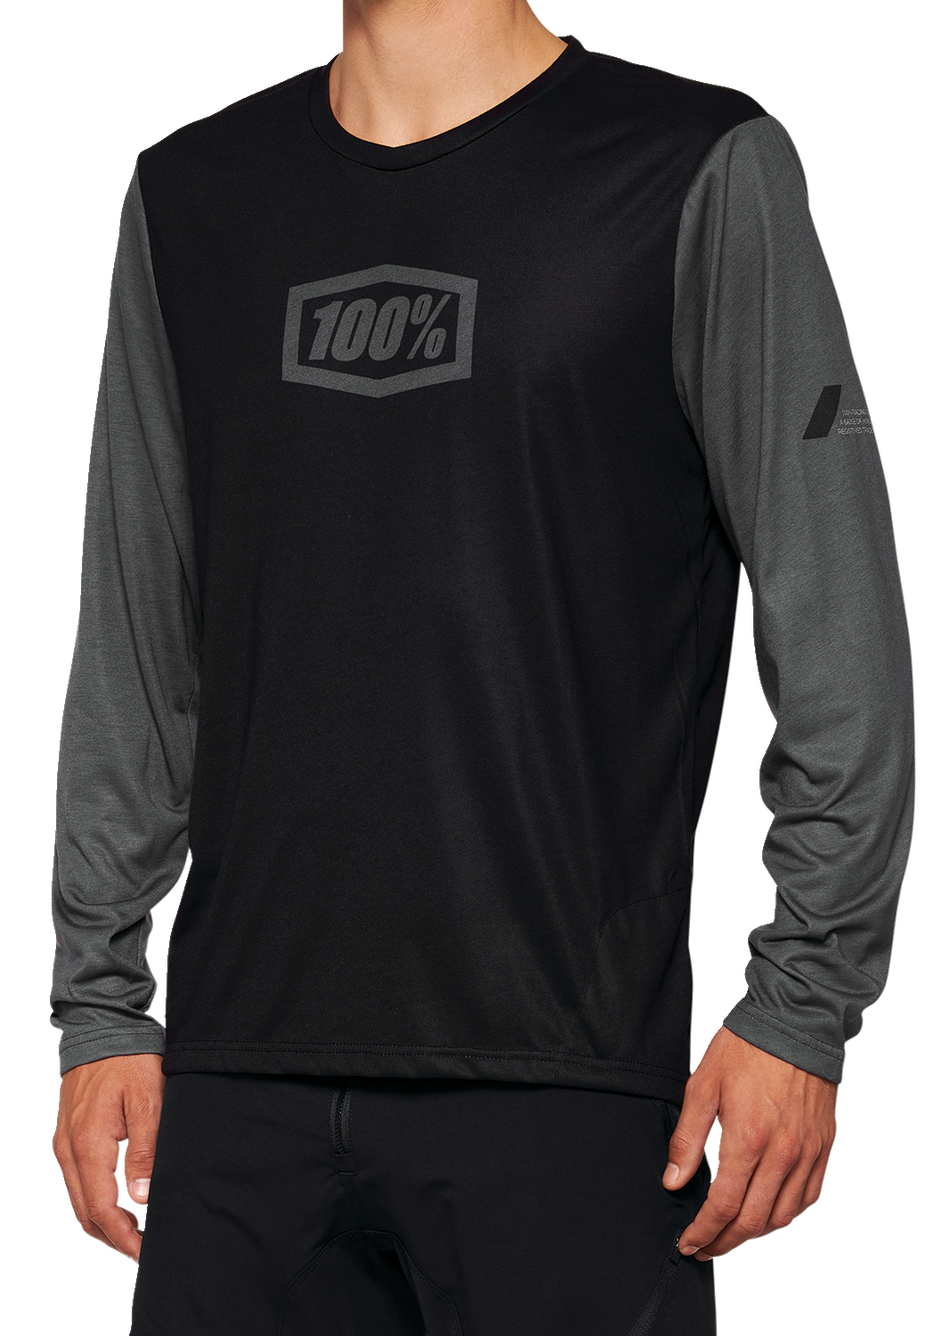 100% Airmatic Long-Sleeve Jersey - Black - Small 40019-00000